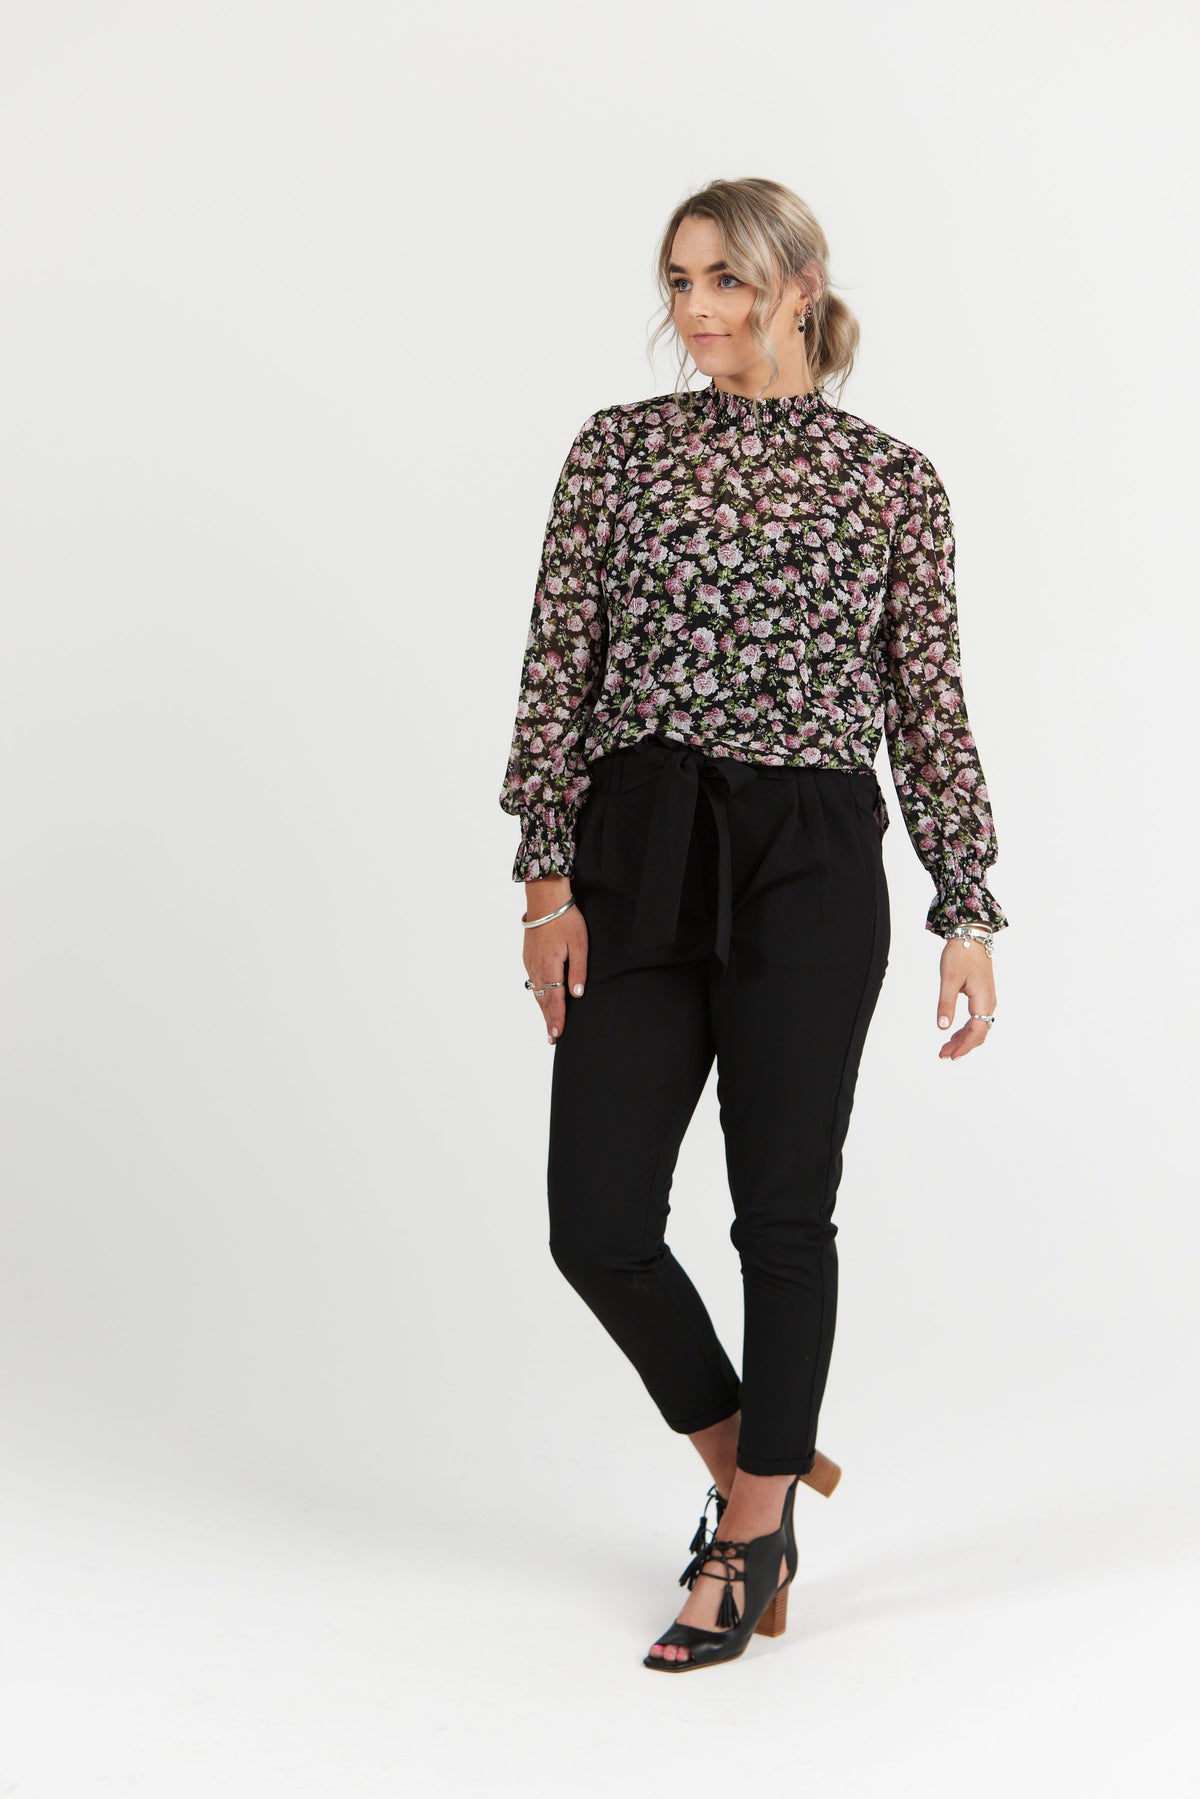 Notting Hill Top Rose Deluxe - EXCLUSIVE PRINT TO MINT